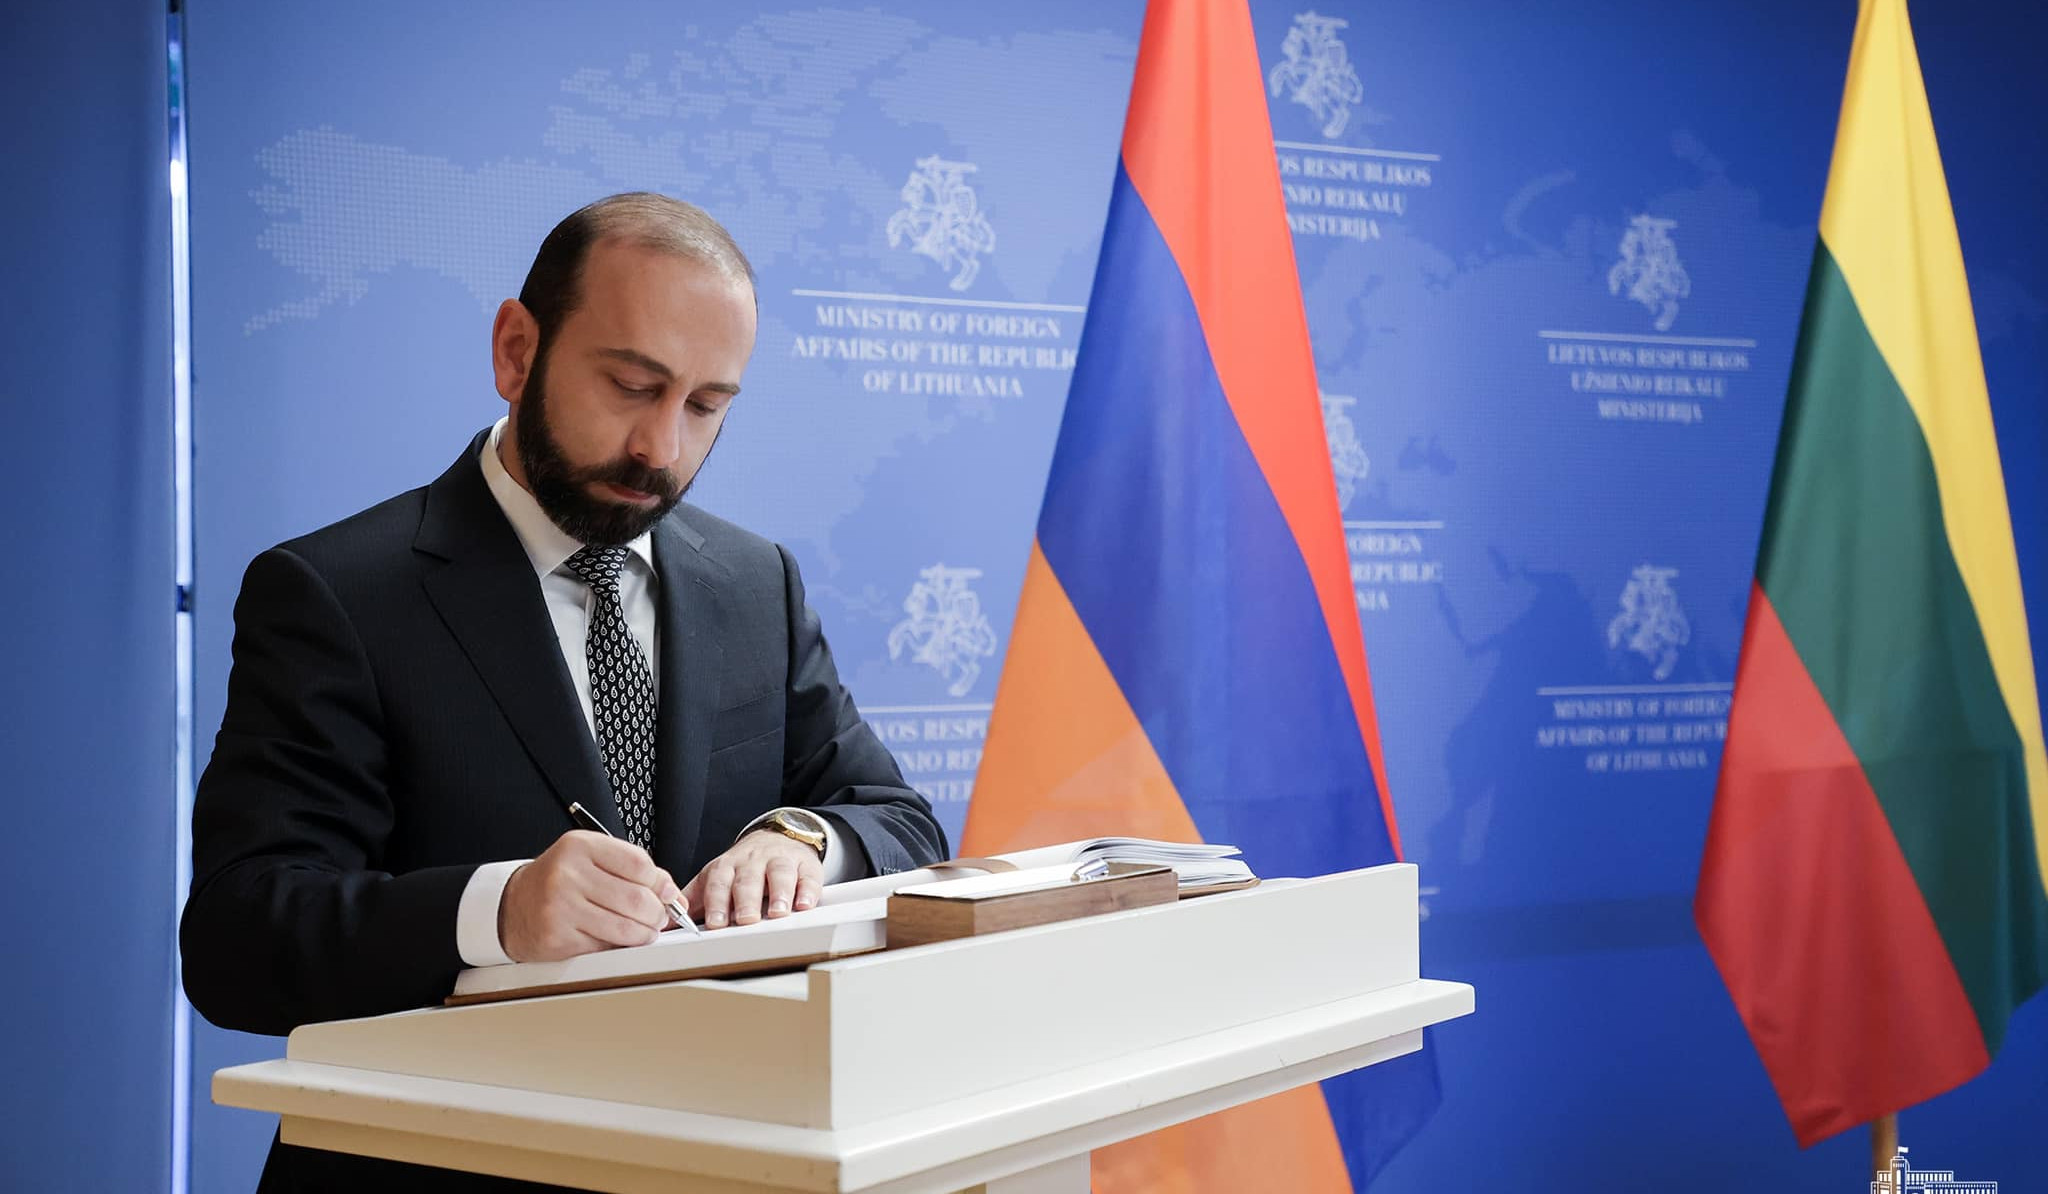 Ararat Mirzoyan makes a note in the guest book of the Lithuanian Foreign Ministry